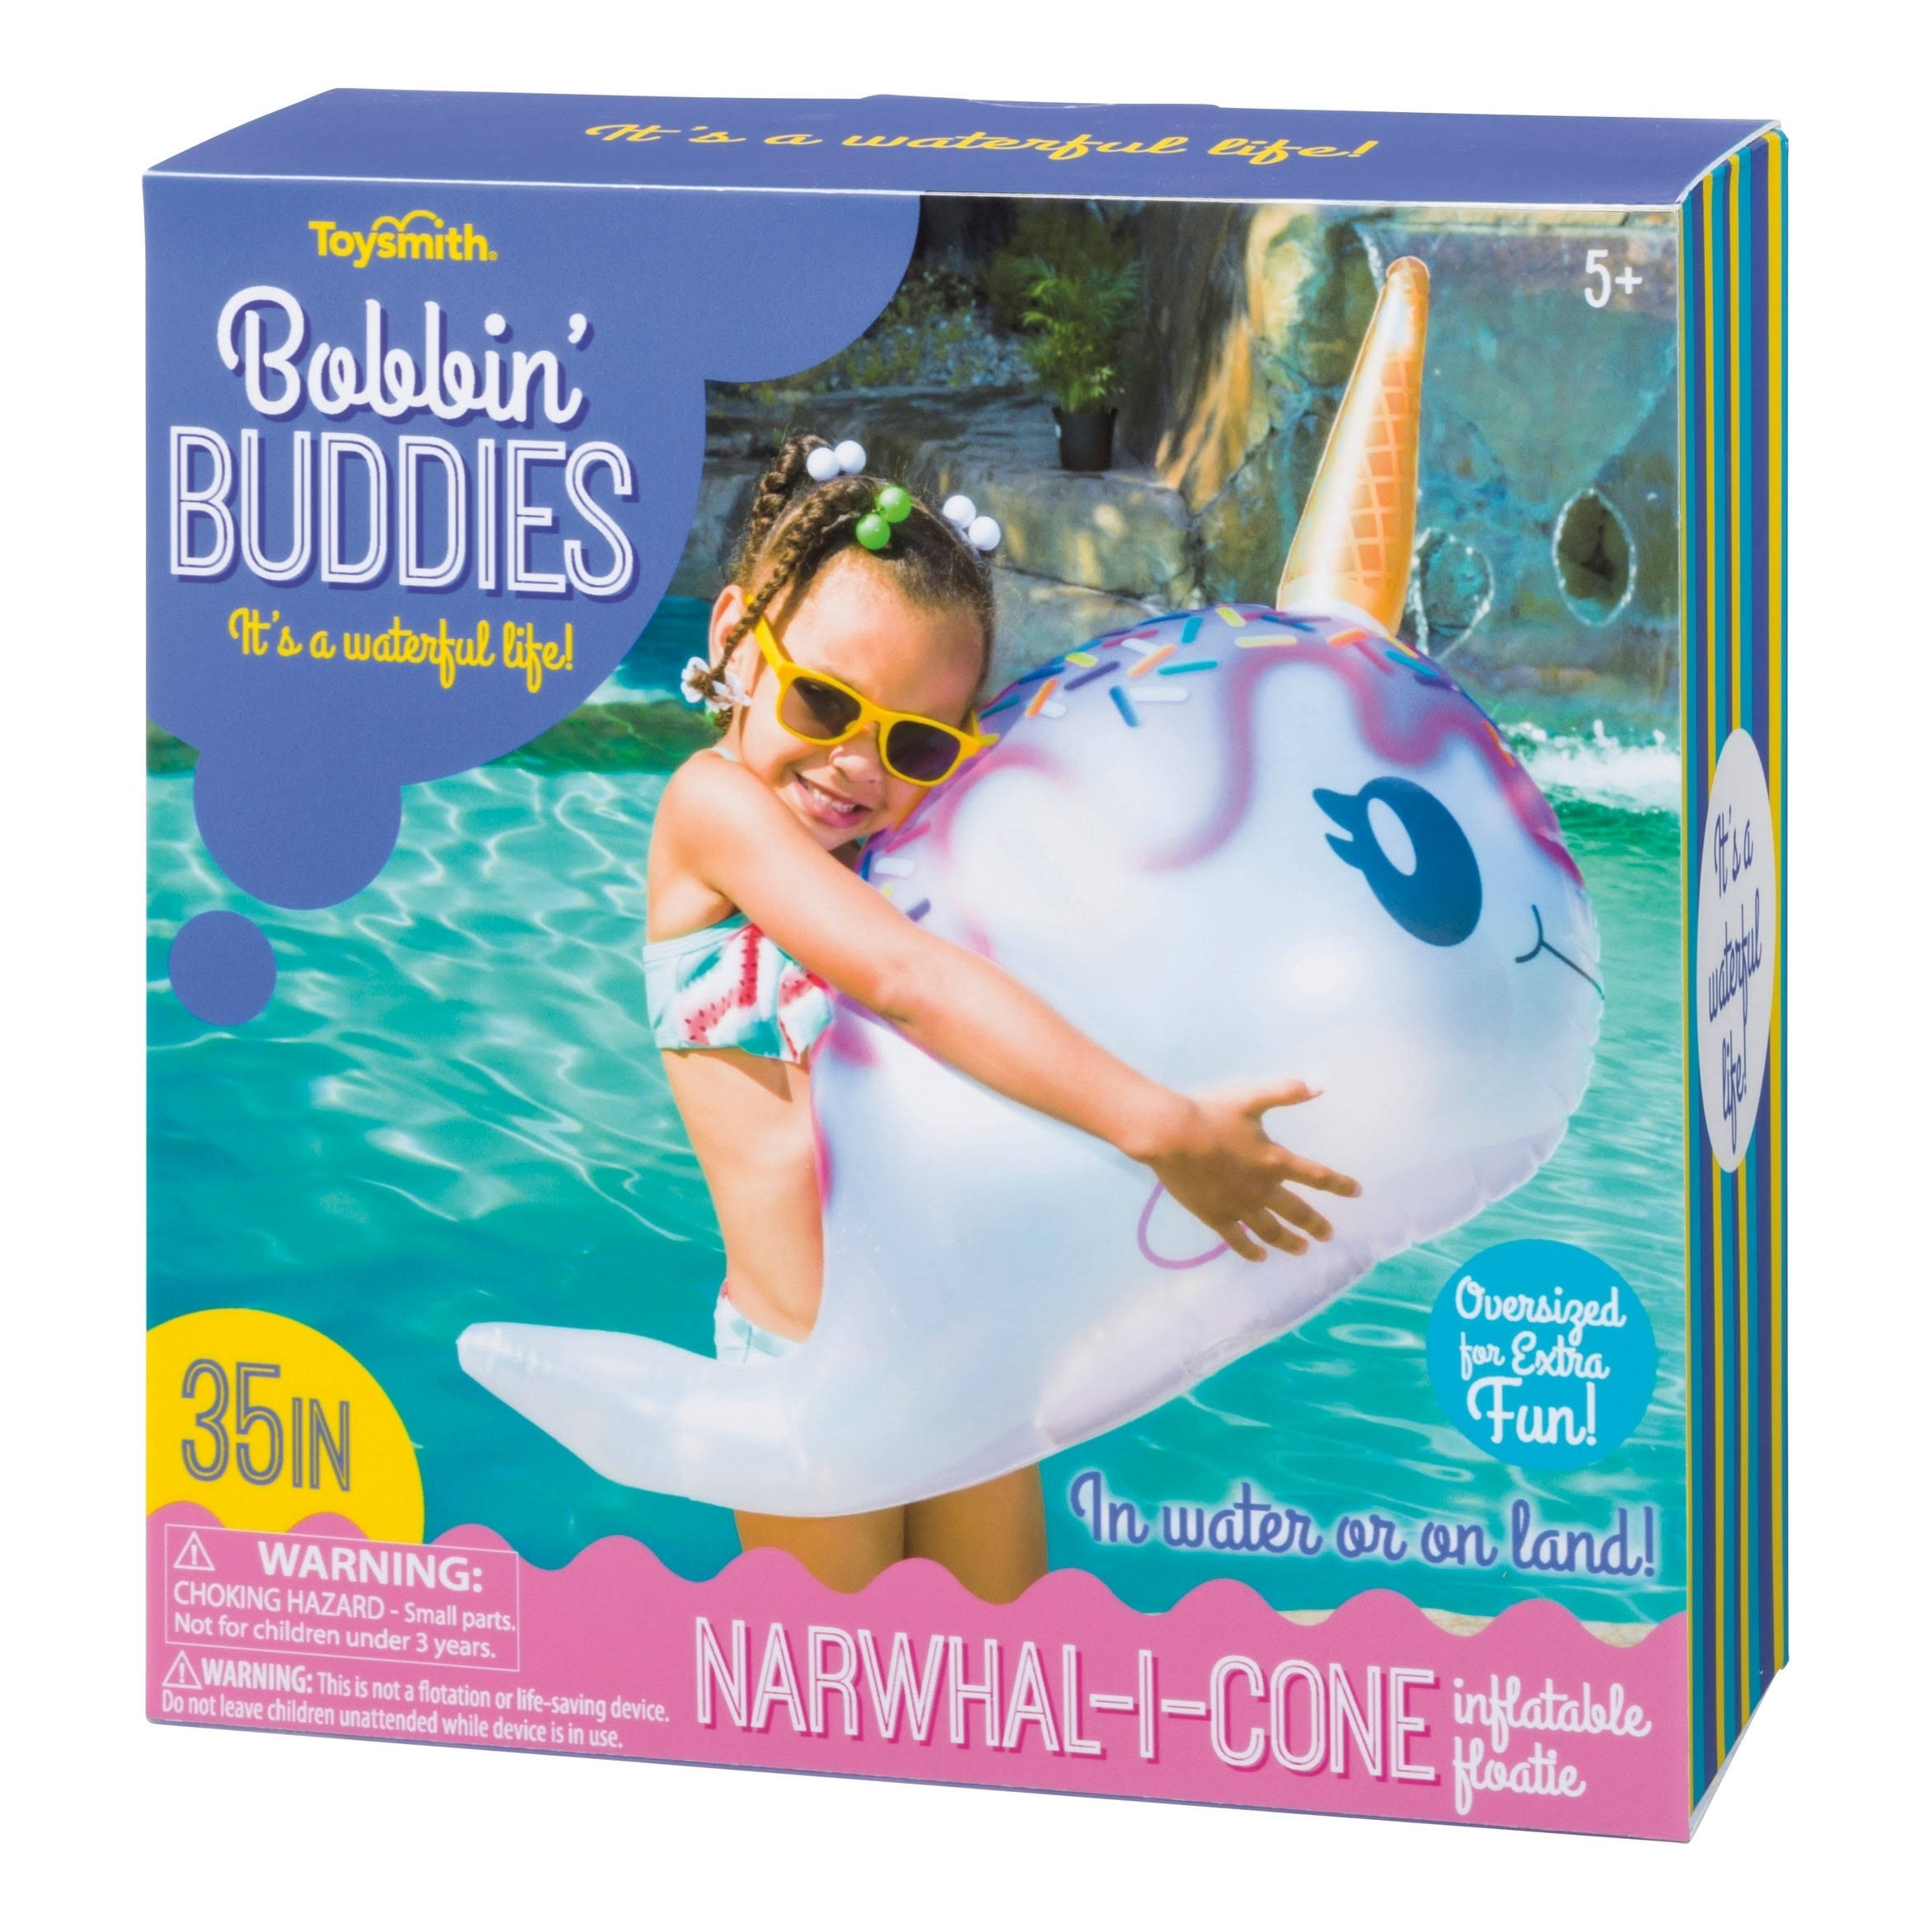 Toysmith Bobbin' Buddies Narwhal-I-Cone Inflatable Pool Toy